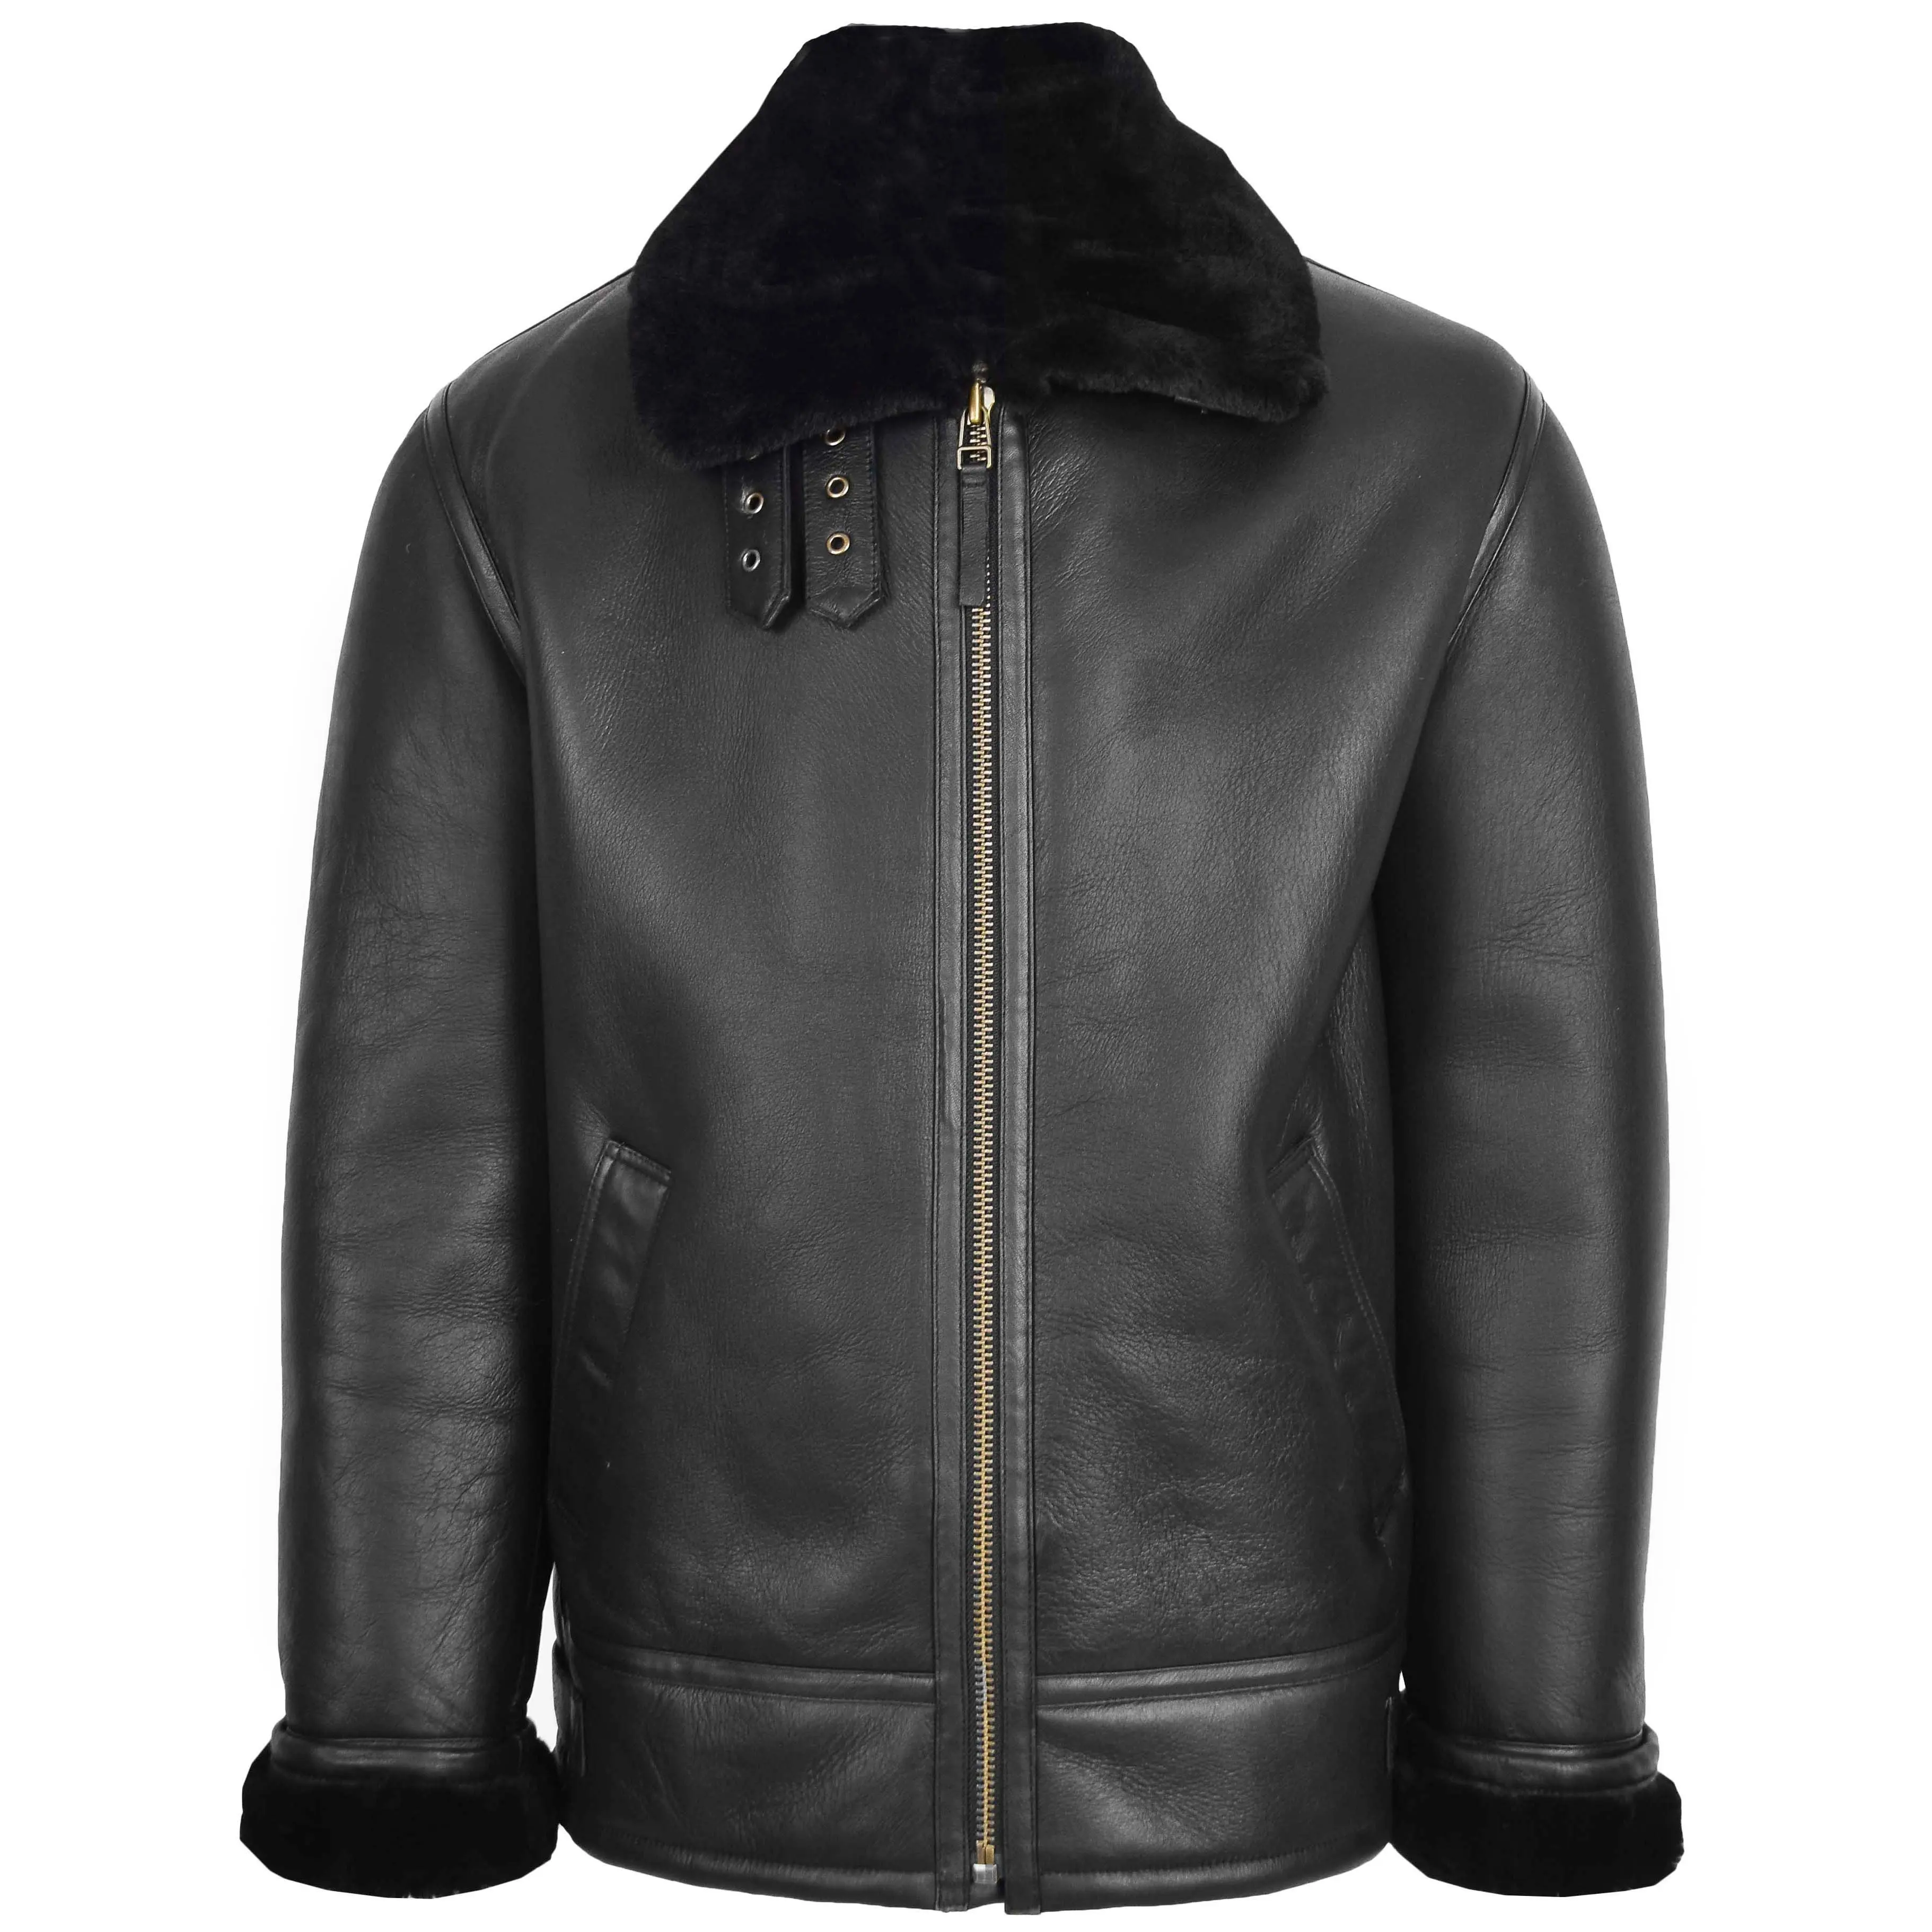 Wholesales Leather Fur Jacket Men s Leather Jacket High Quality Black Leather Men Winter OEM Factory Classic Comfortable Embroid